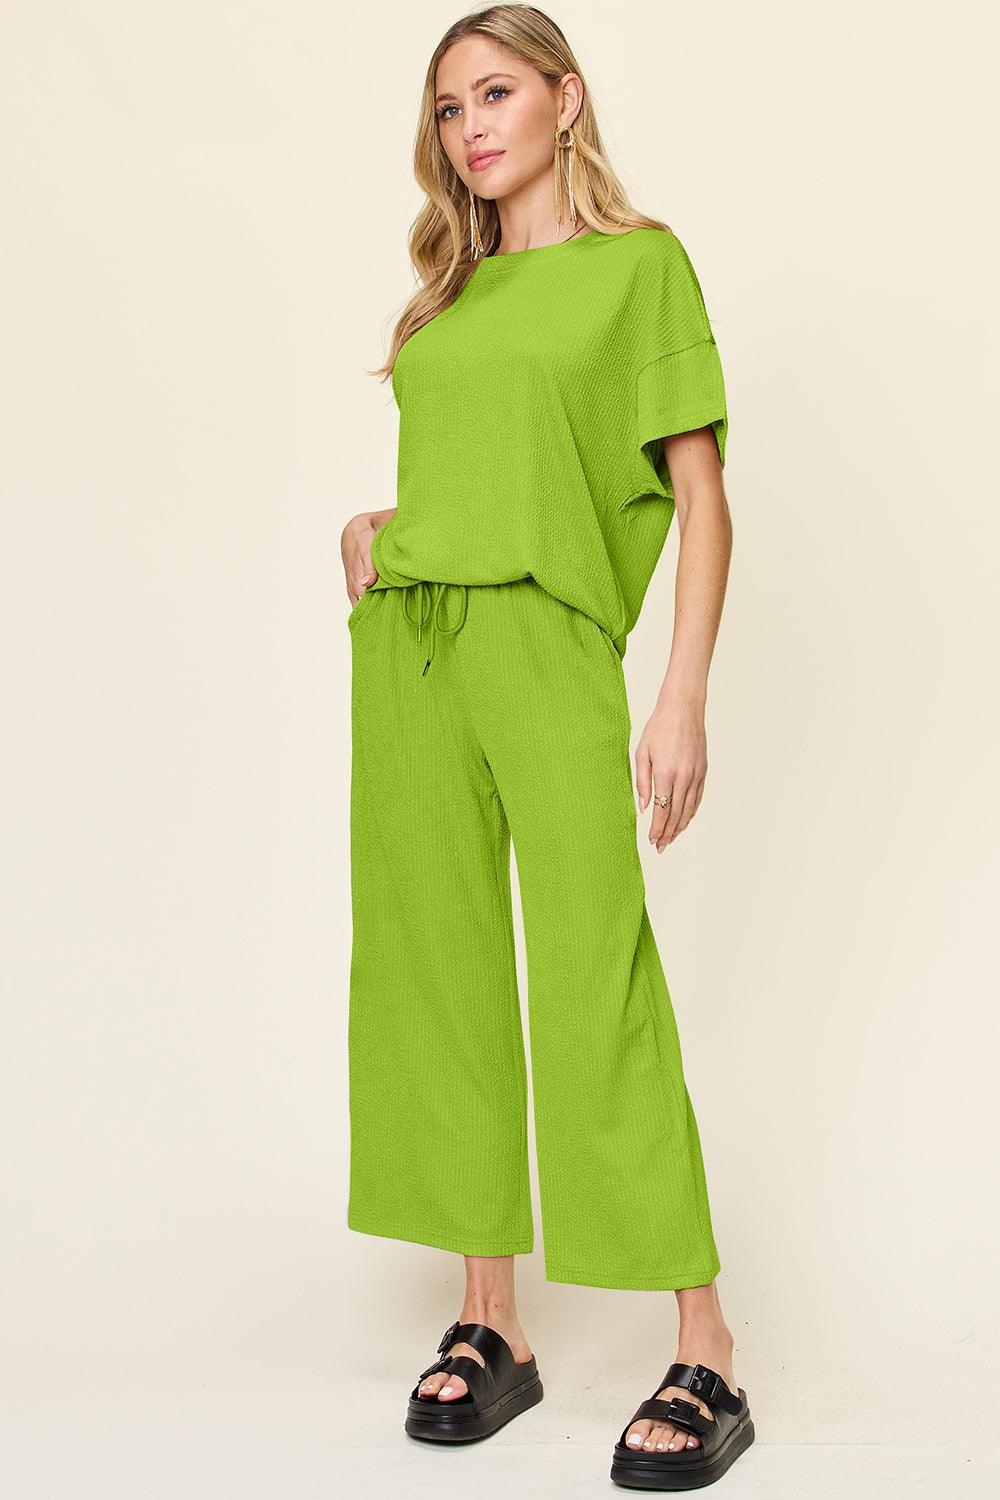 Double Take Full Size Texture Round Neck Short Sleeve T-Shirt and Wide Leg Pants Pants Sets